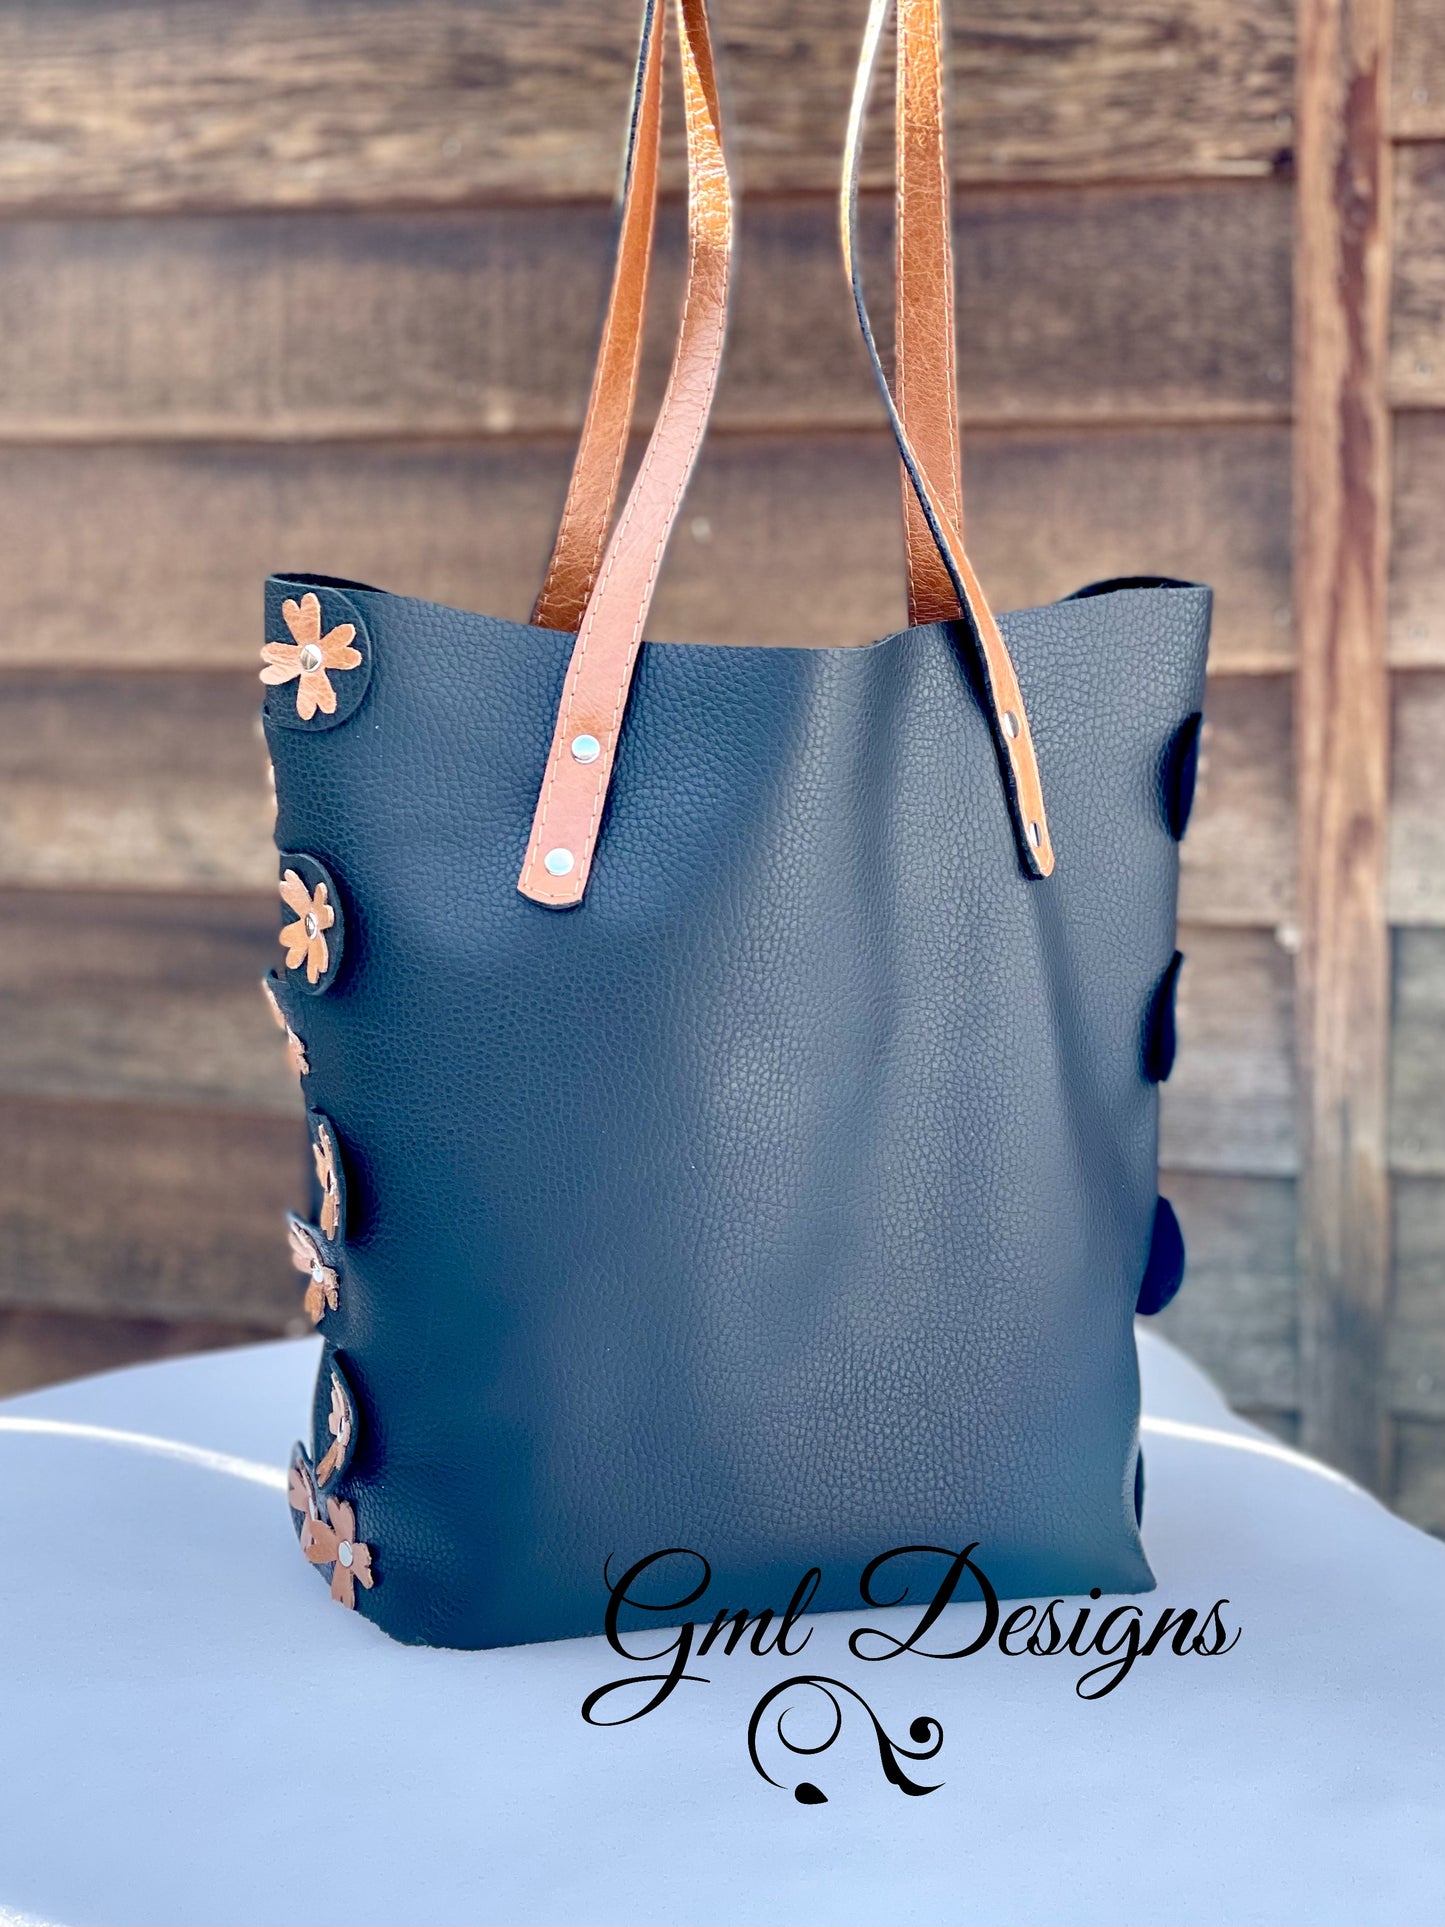 Unlined Leather Tote with Flower Accents